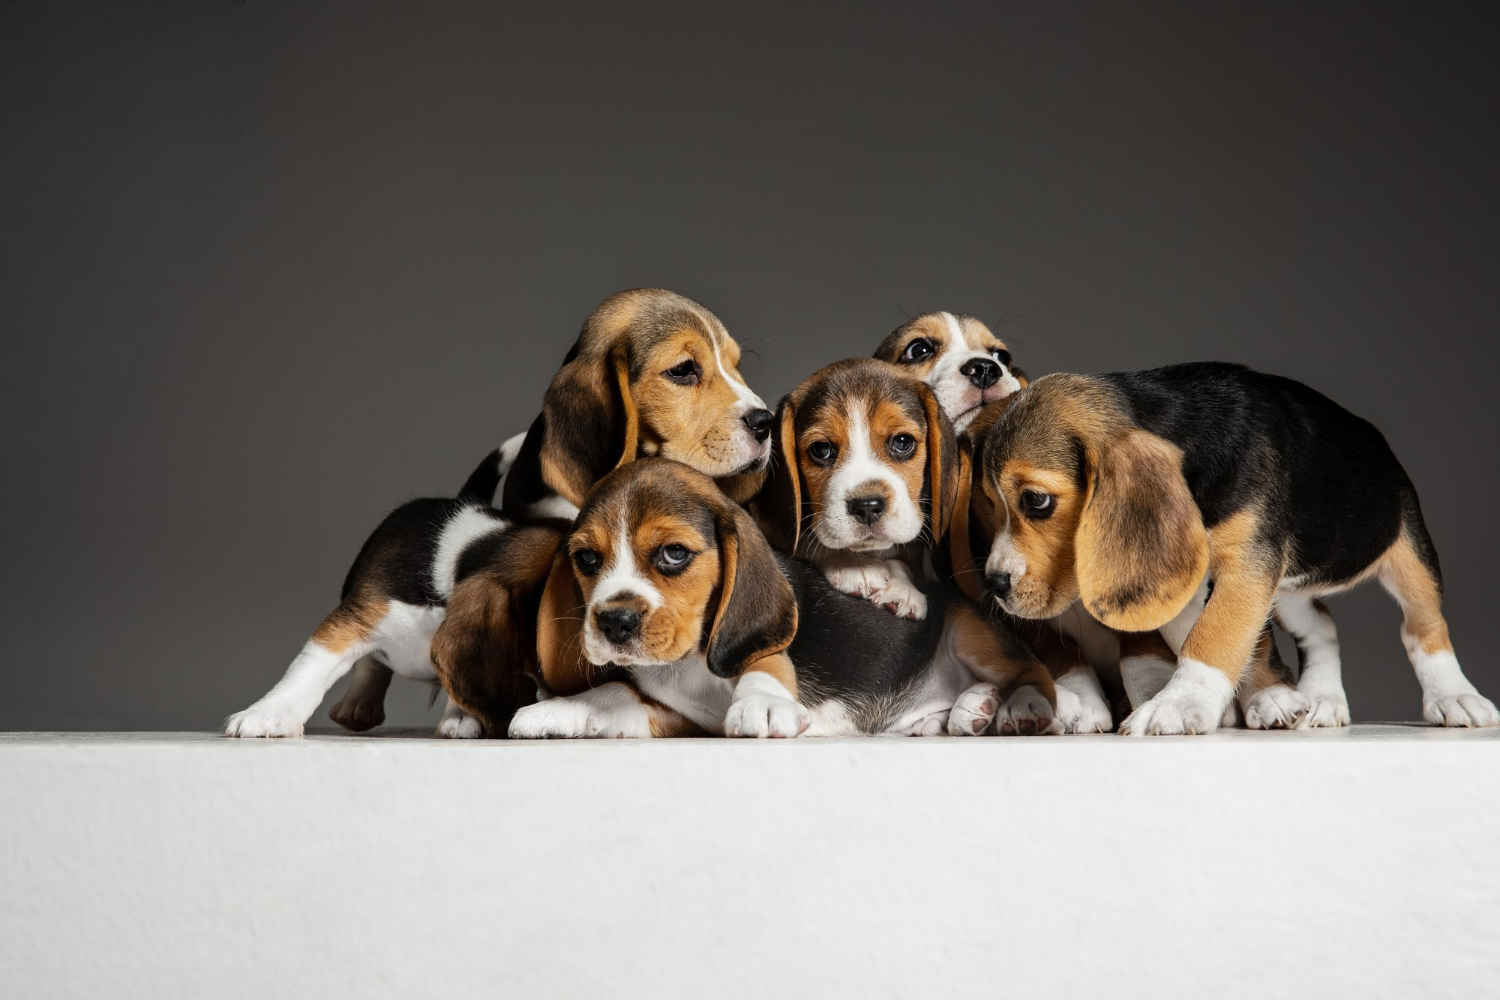 Beagle Exercise Needs: How Much Physical Activity Does Your Beagle Require Daily?